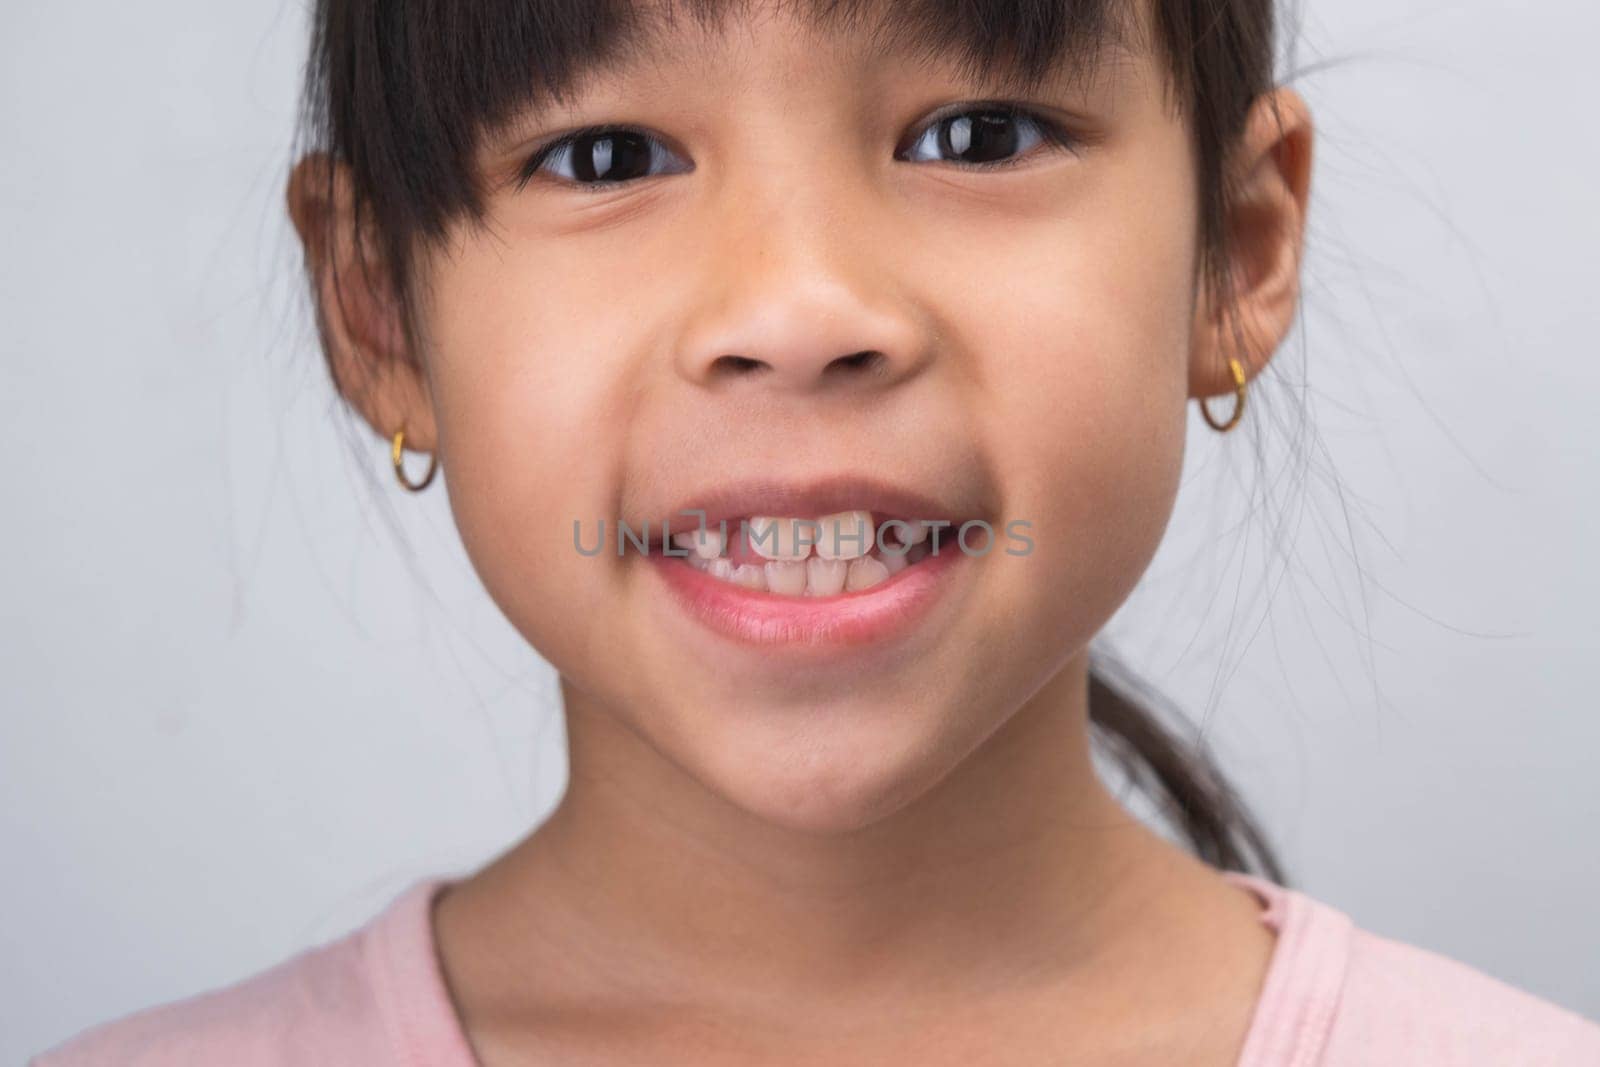 Close-up of cute young girl smiling wide, showing empty space with growing first front teeth. Little girl with big smile and missing milk teeth. Dental hygiene concept